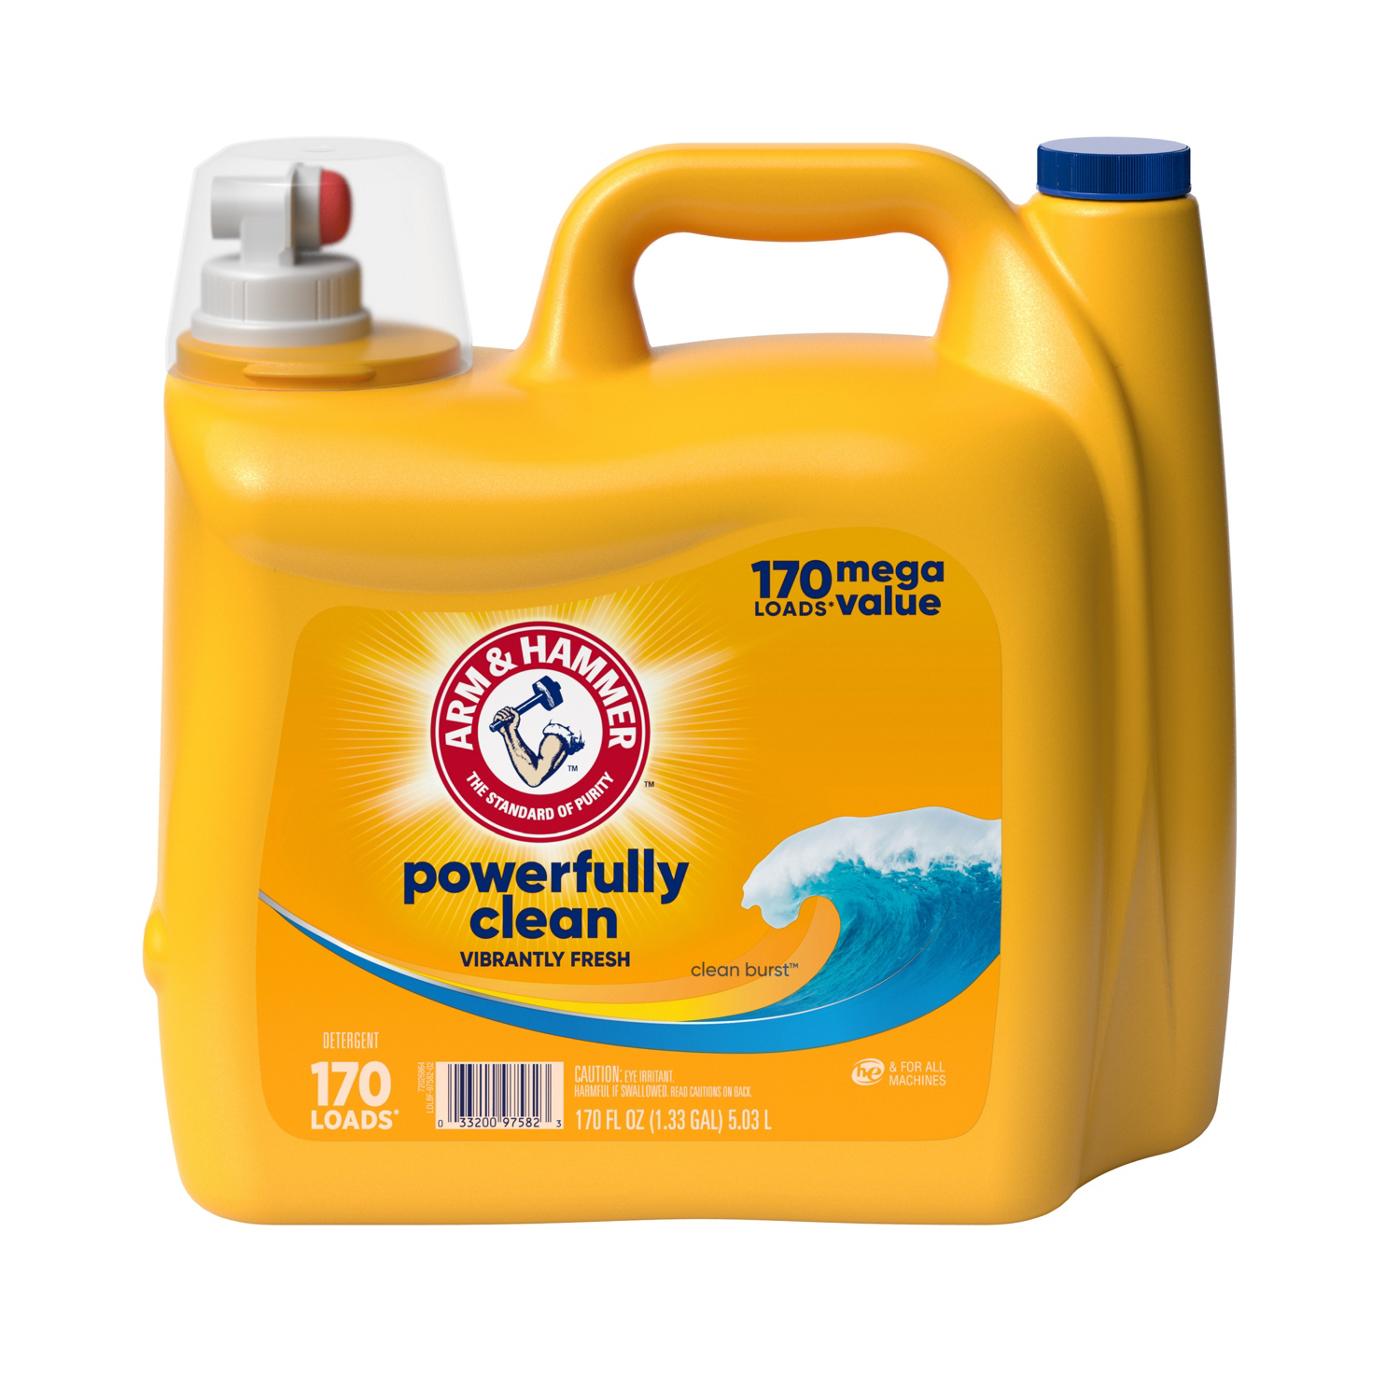 Arm & Hammer Powerfully Clean HE Liquid Laundry Detergent, 170 Loads - Clean Burst; image 1 of 2